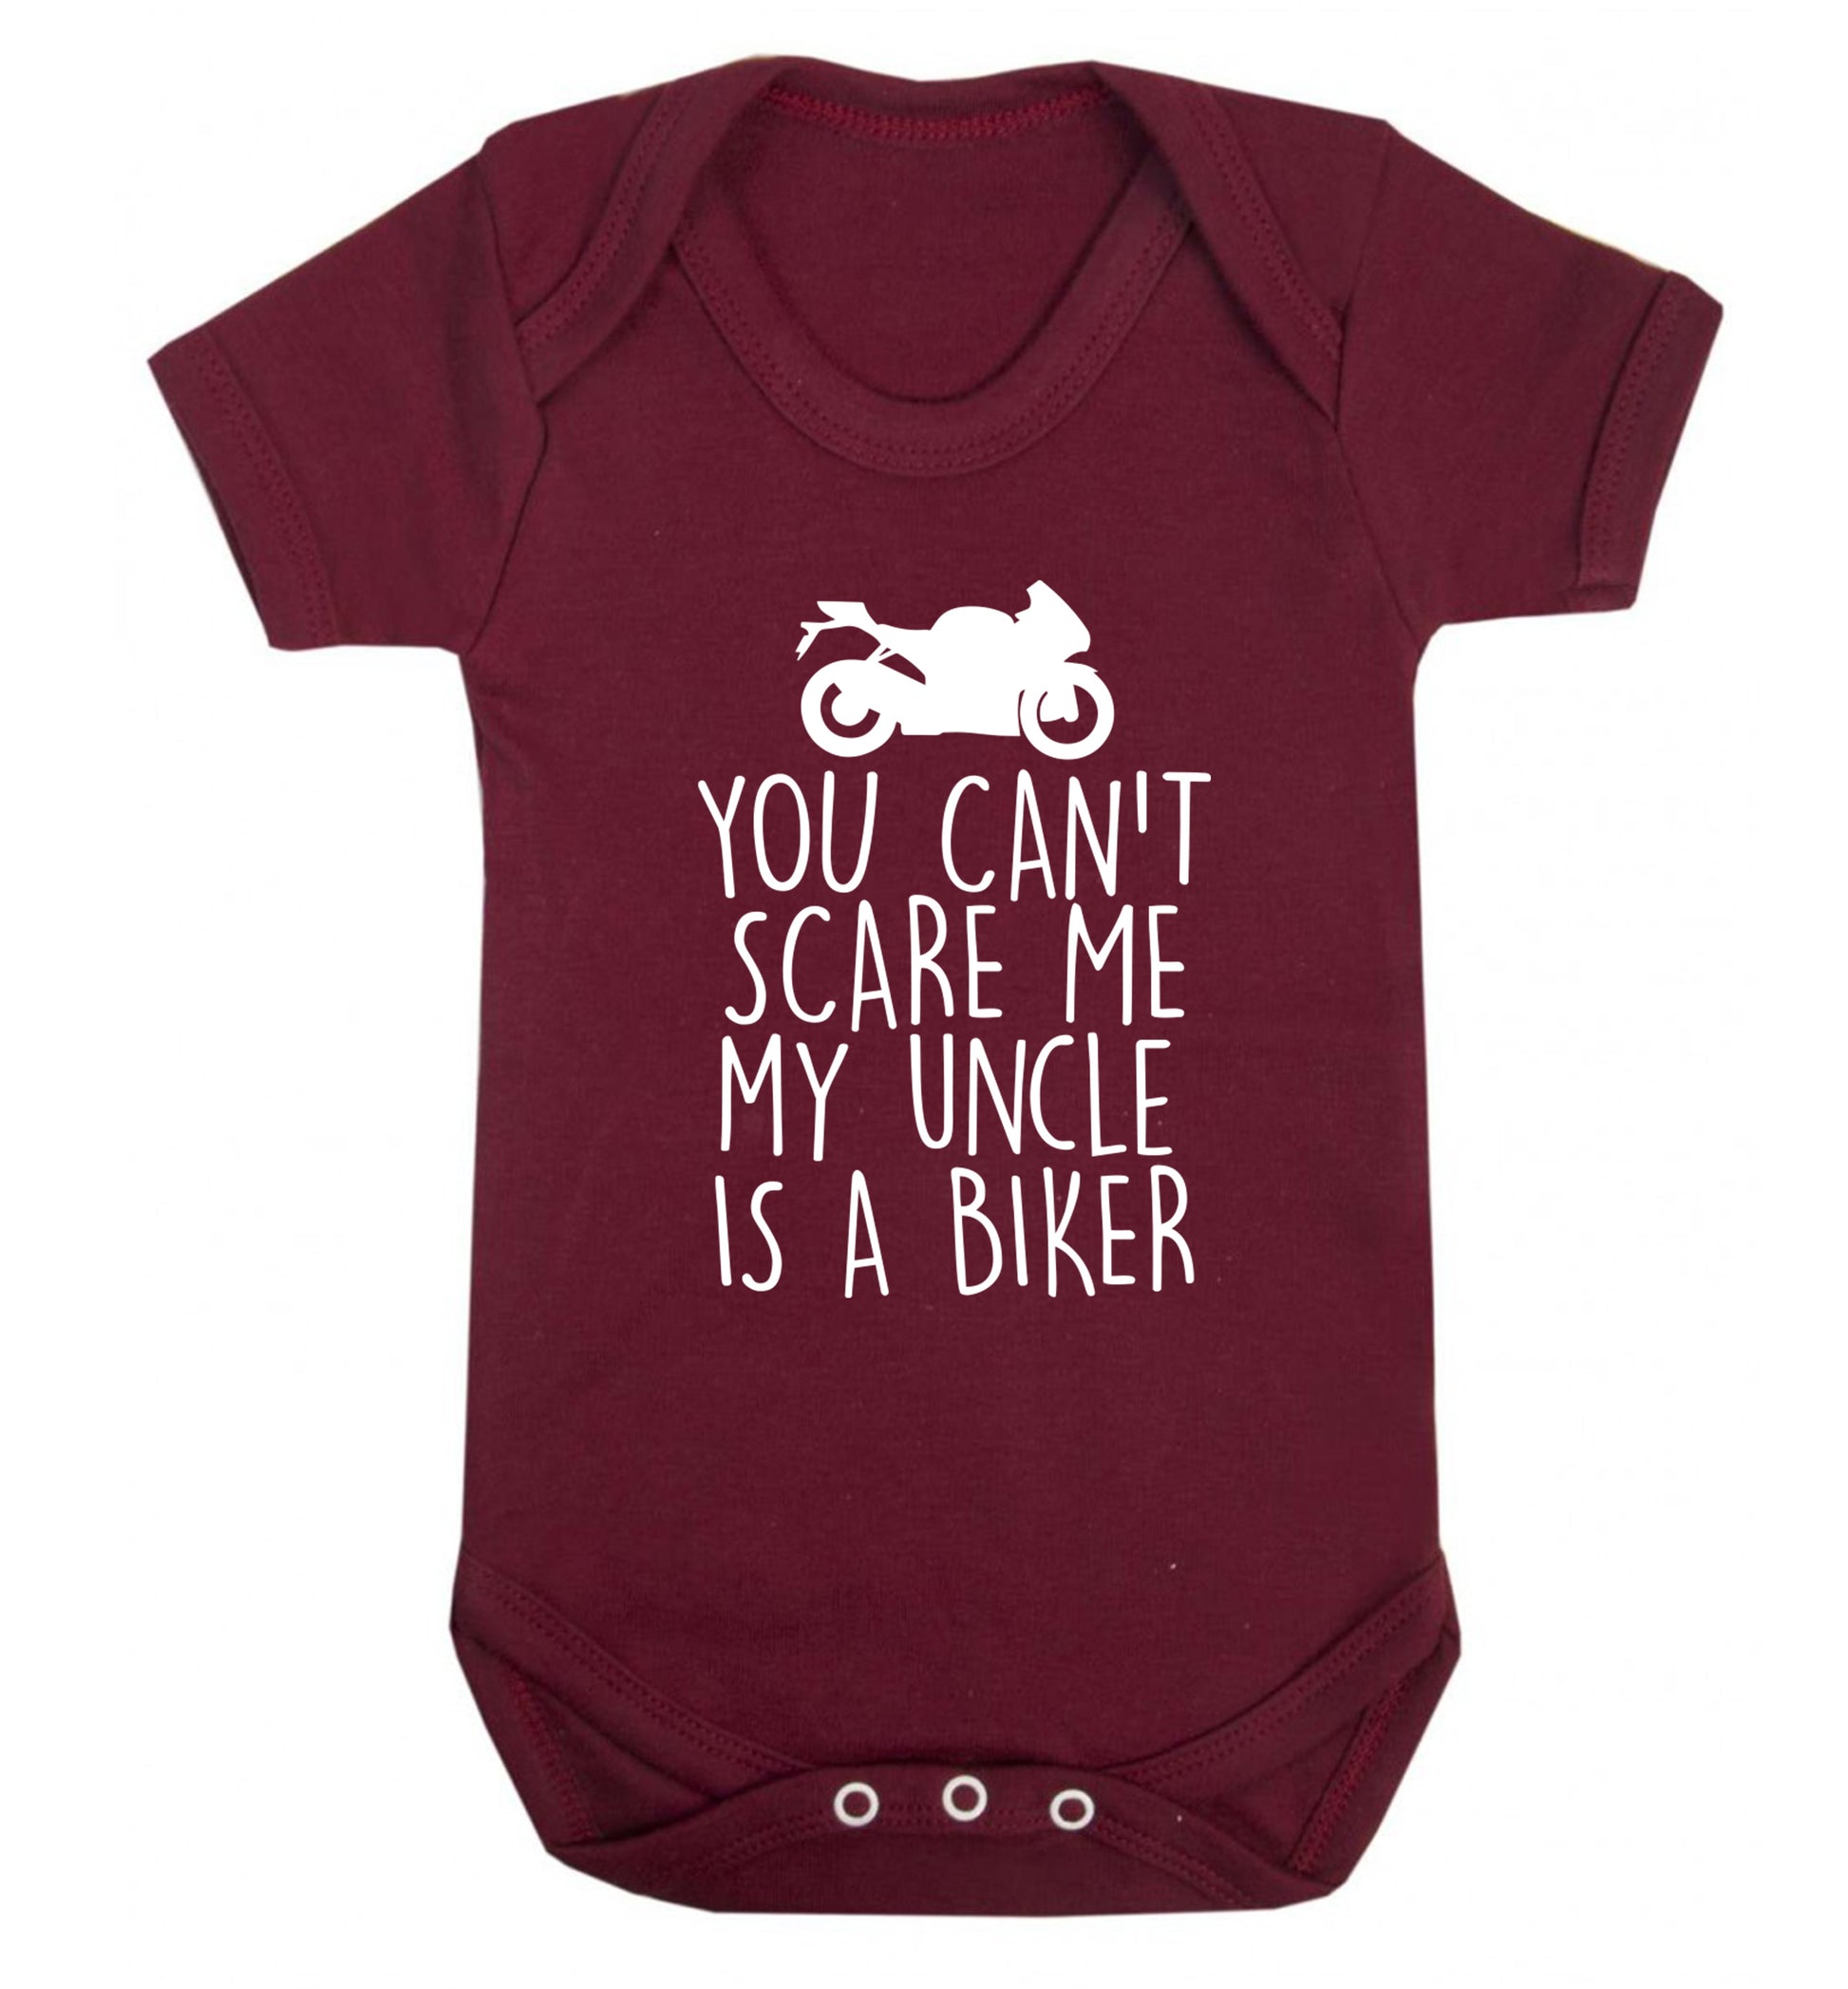 You can't scare me my uncle is a biker Baby Vest maroon 18-24 months